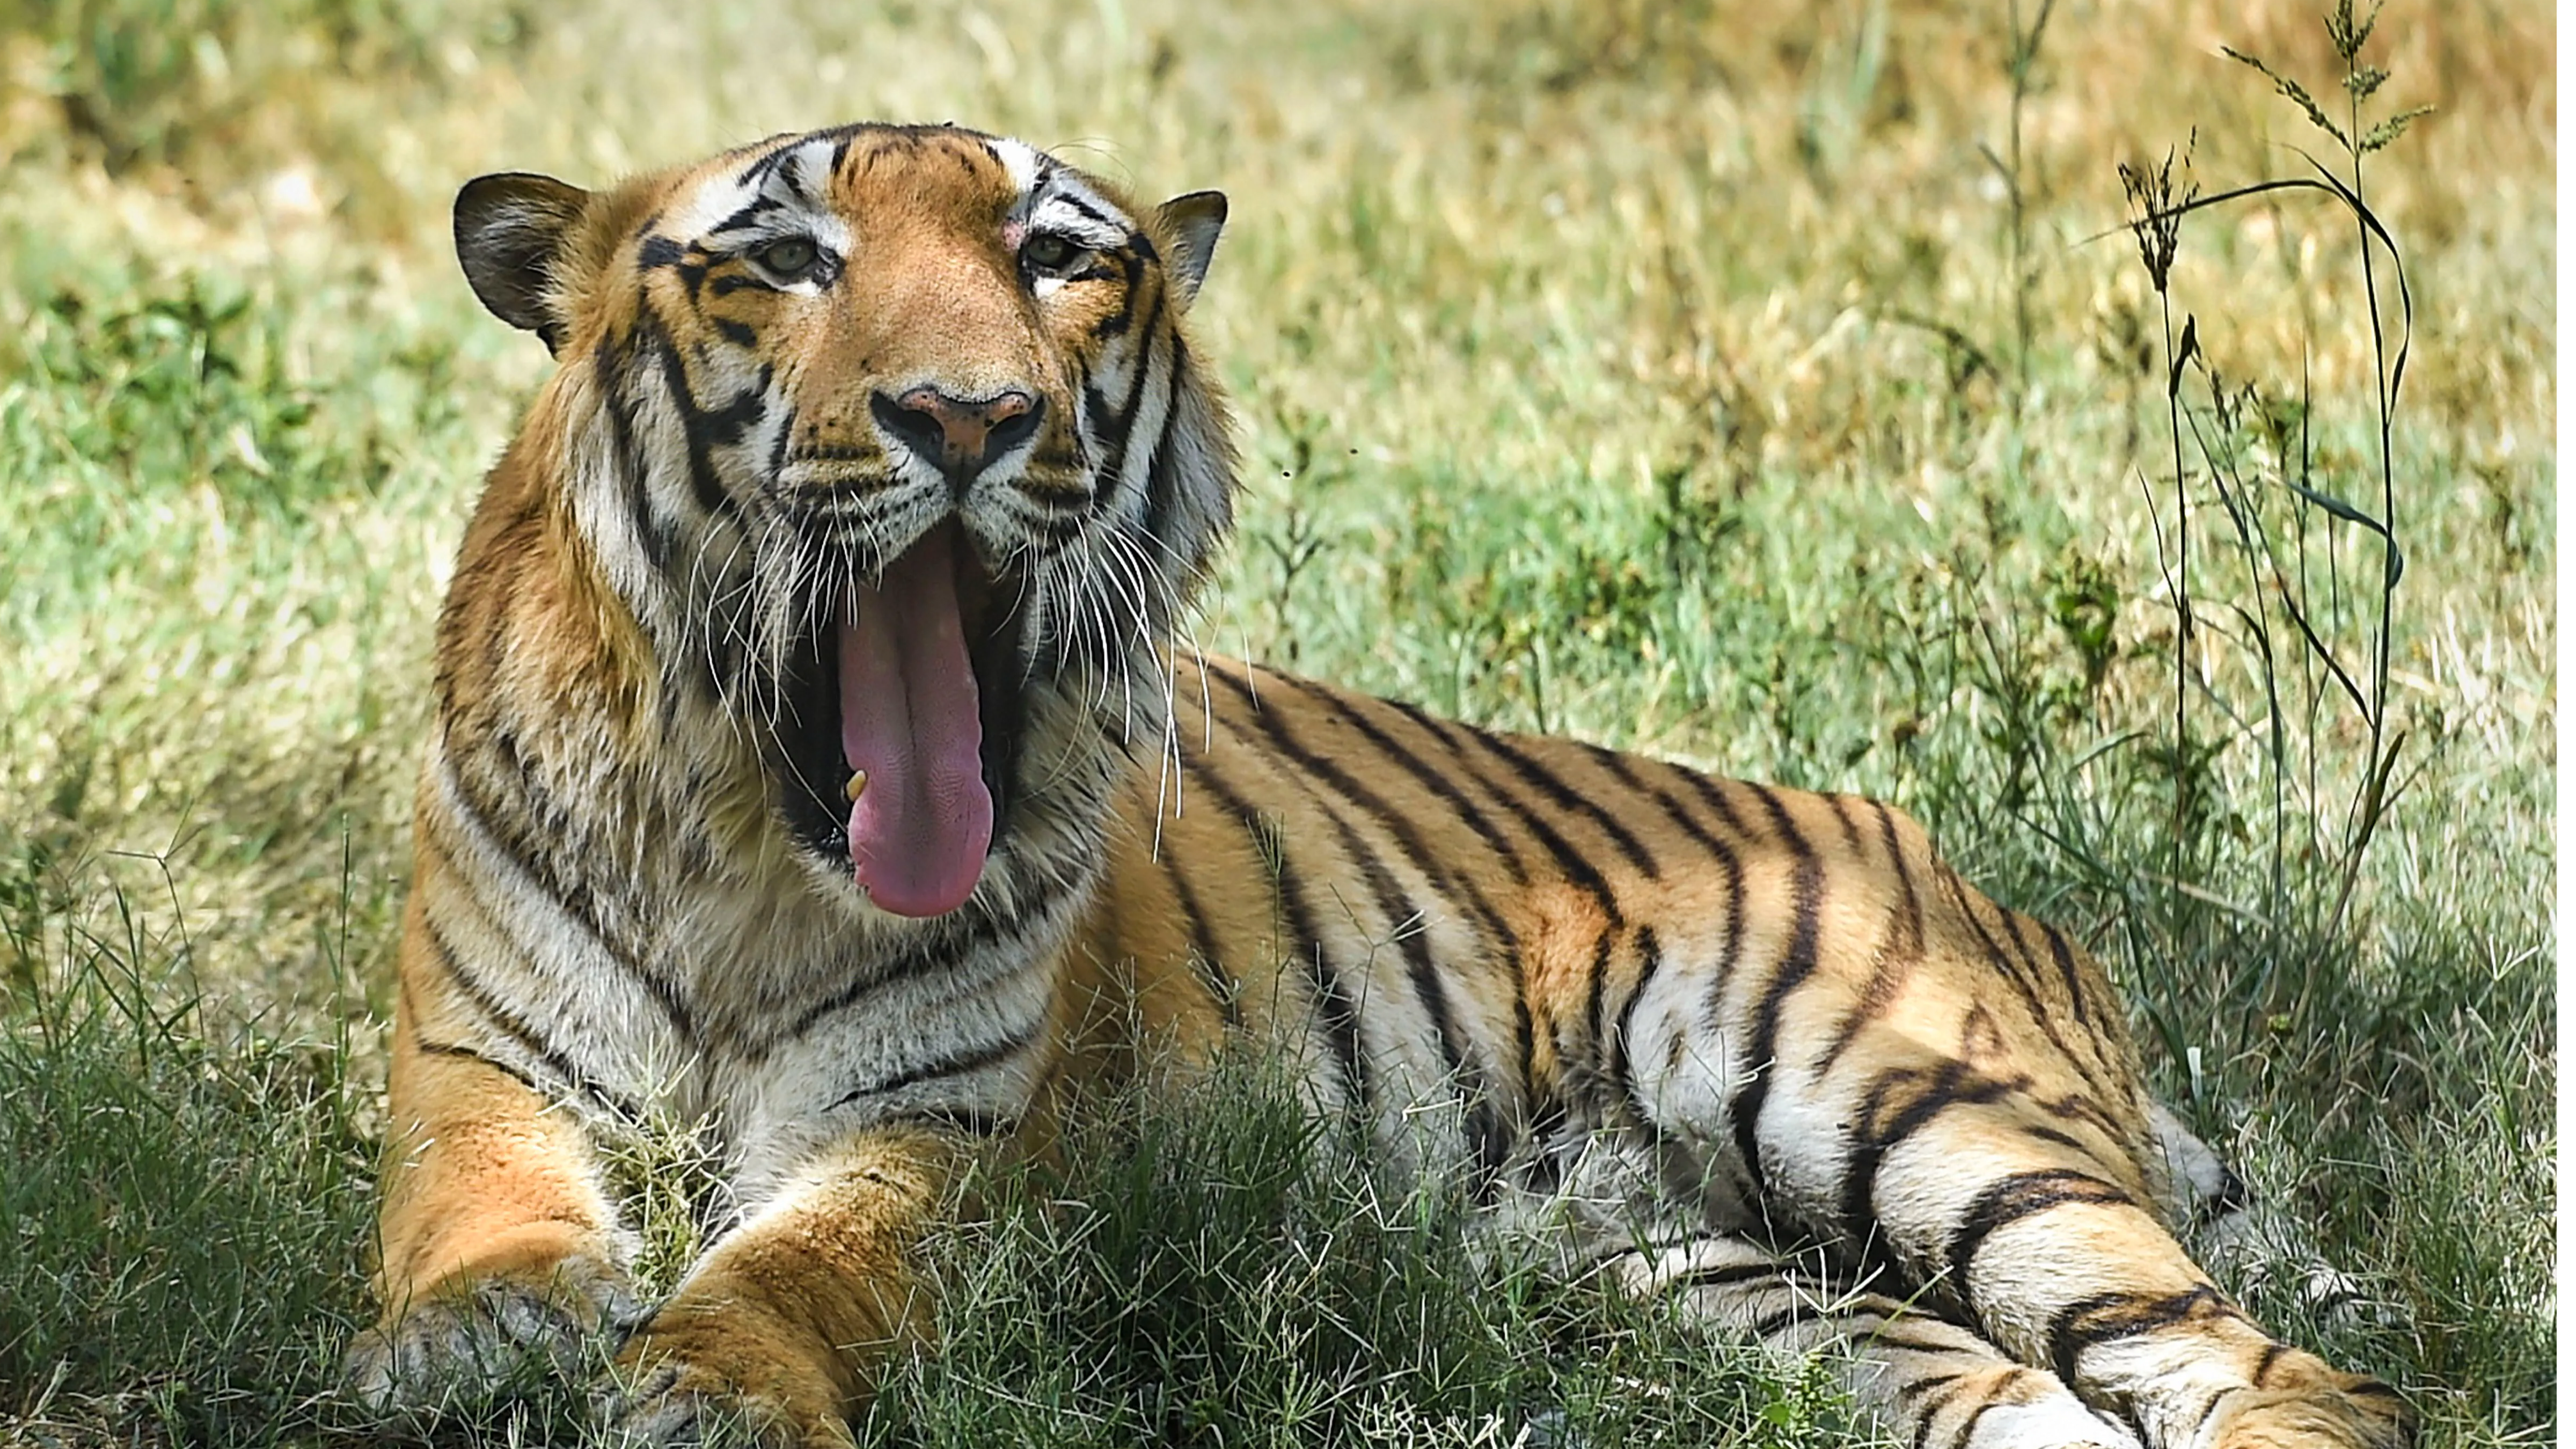 International Tiger Day 2021: Steps you can take to save tigers